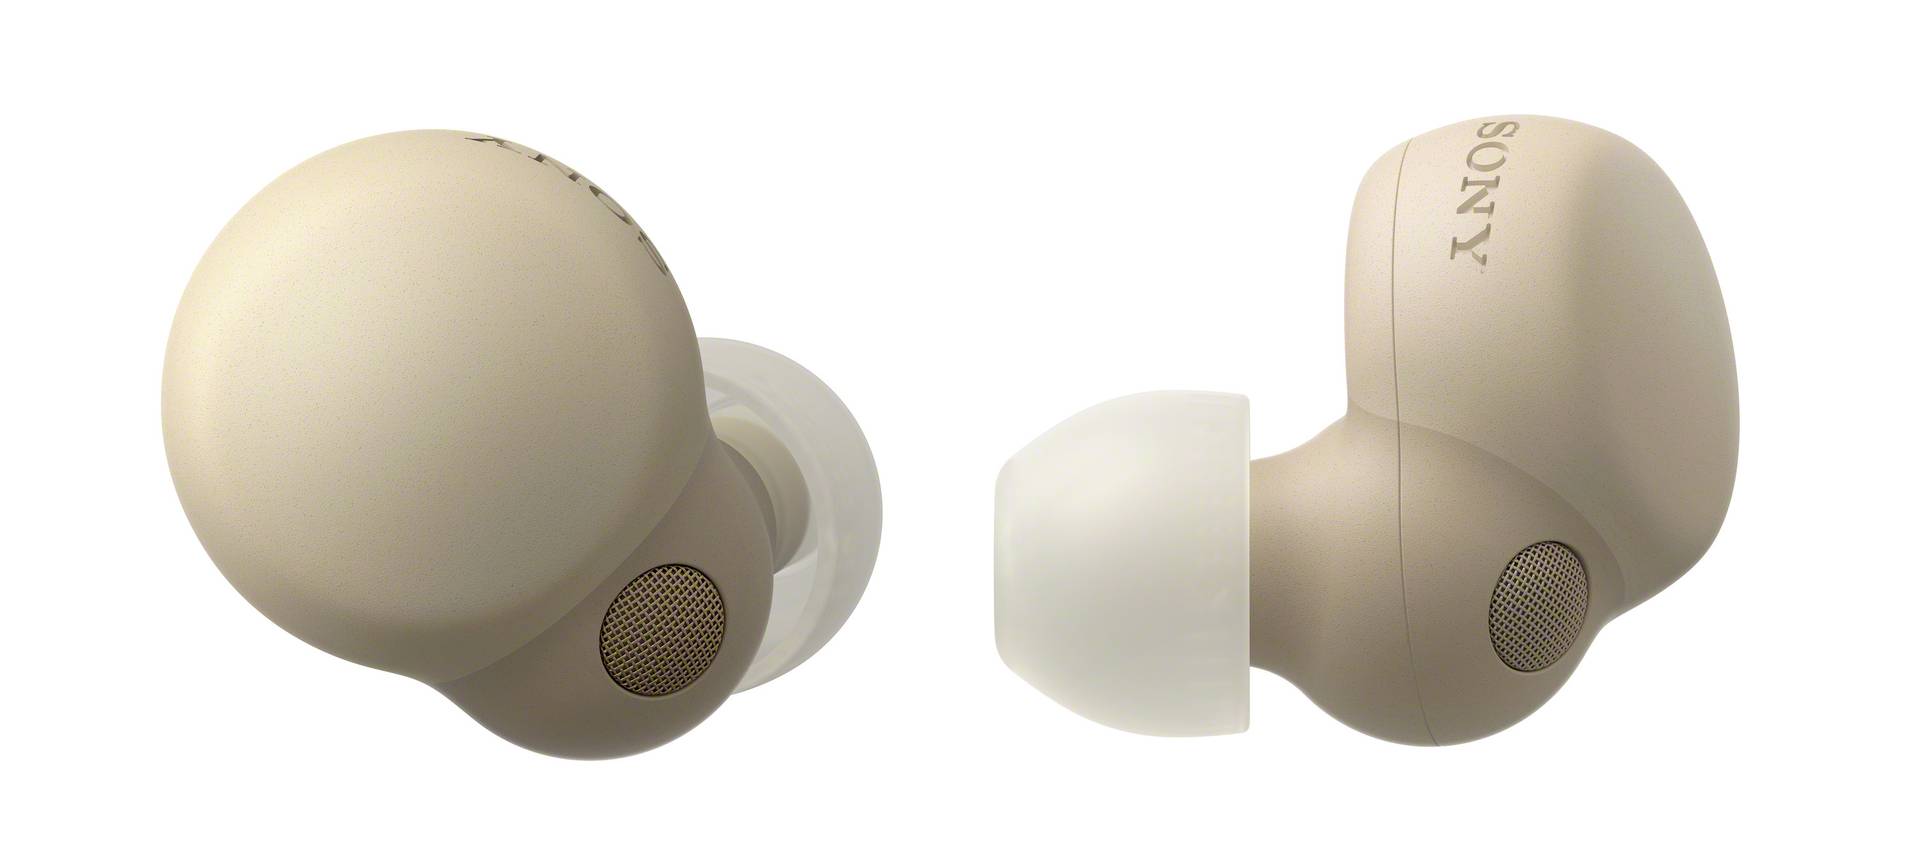 Sony LinkBuds S earbuds ditch the ring-shaped design of the original